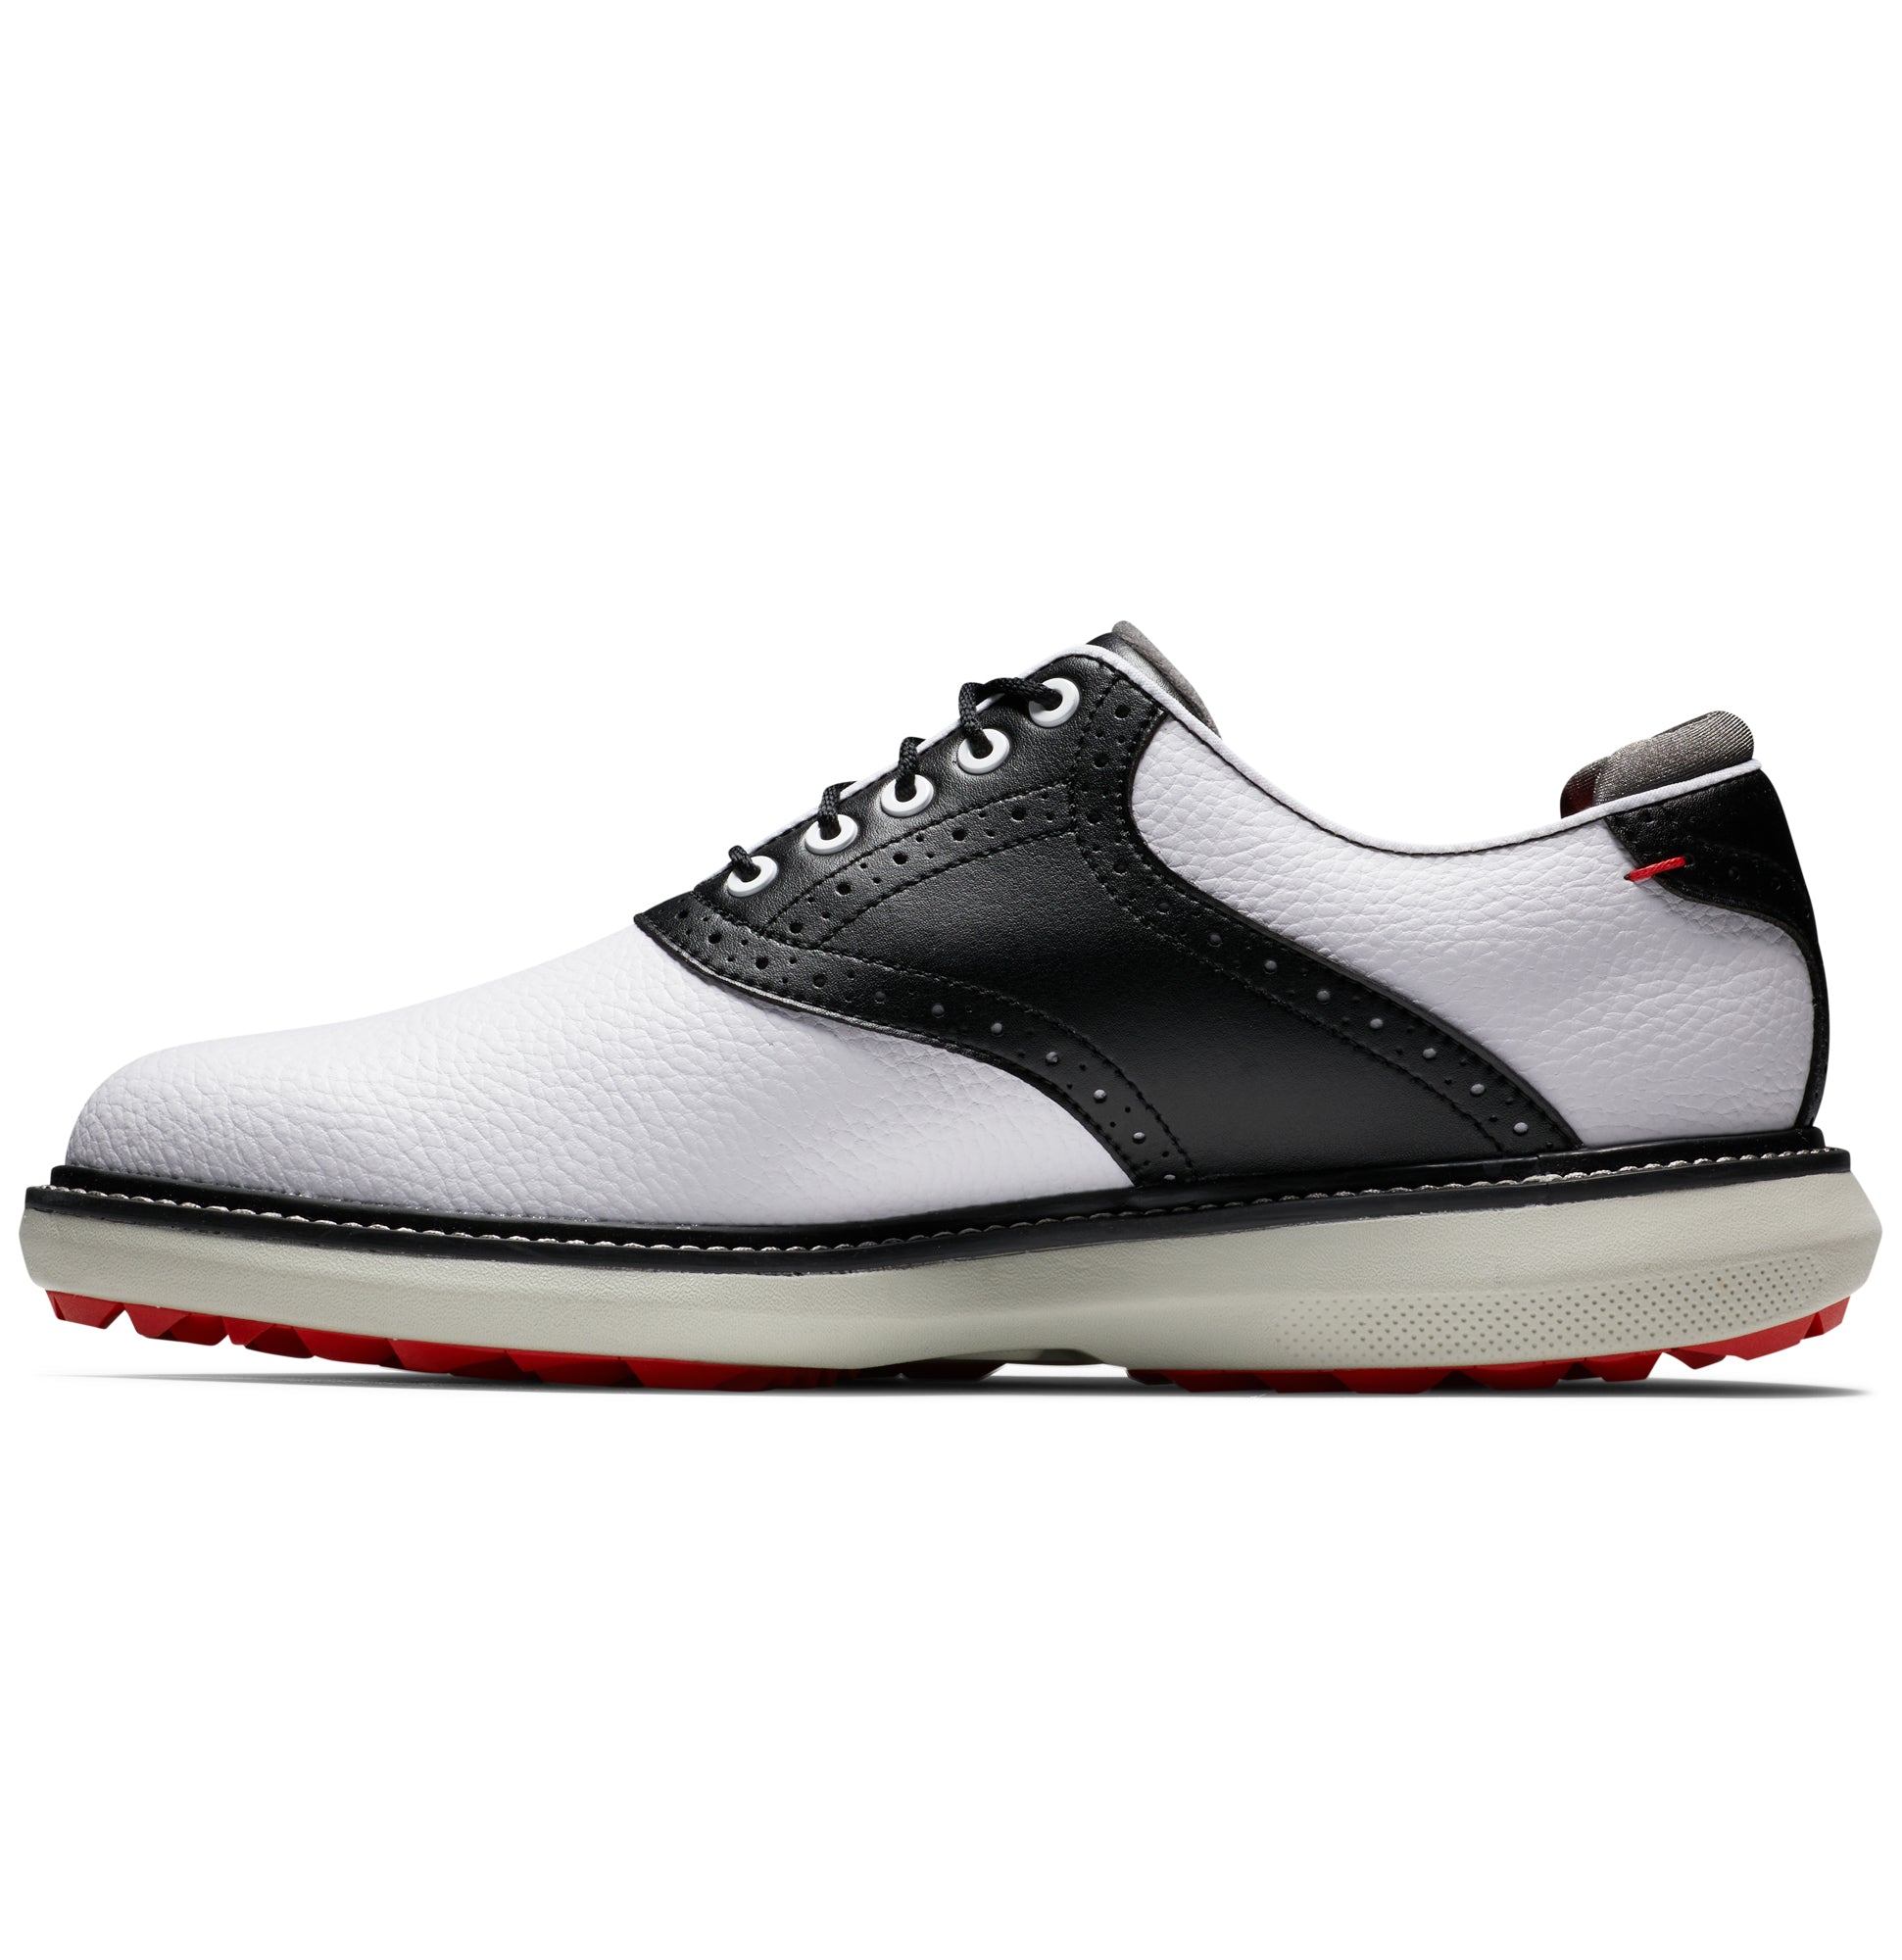 footjoy-fj-traditions-spikeless-golf-shoes-57924-white-black-grey